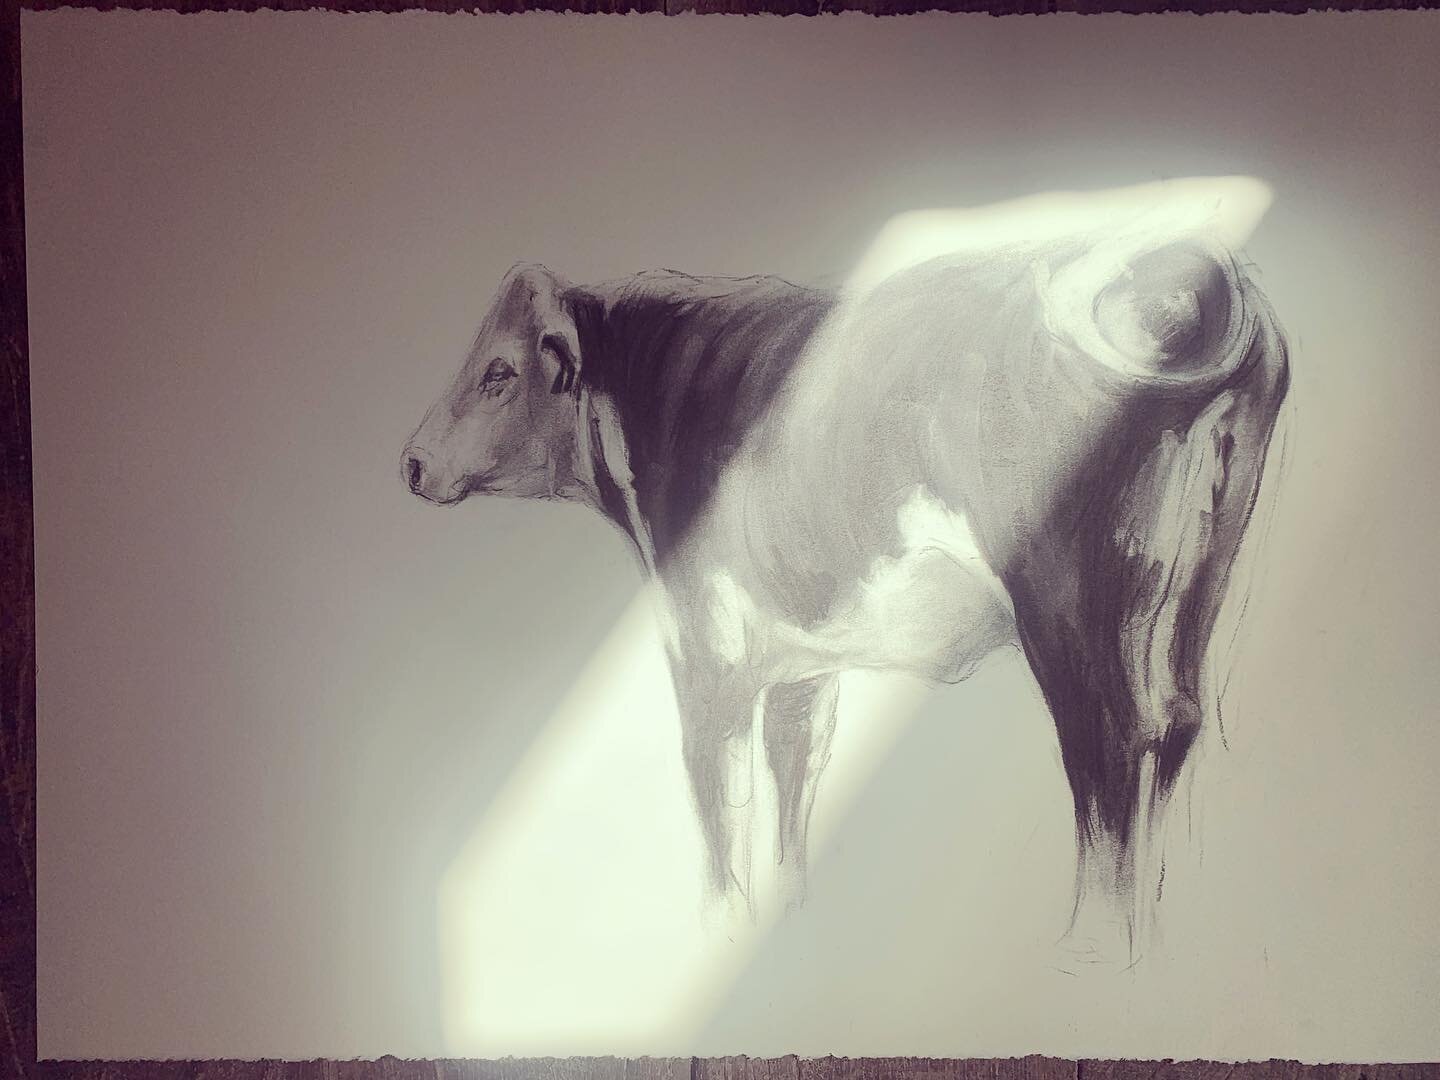 Sunny studio #herefordcattle #worksonpaper #herefordheifer #contemporarydrawing #wales #hayonwye #charcoaldrawing